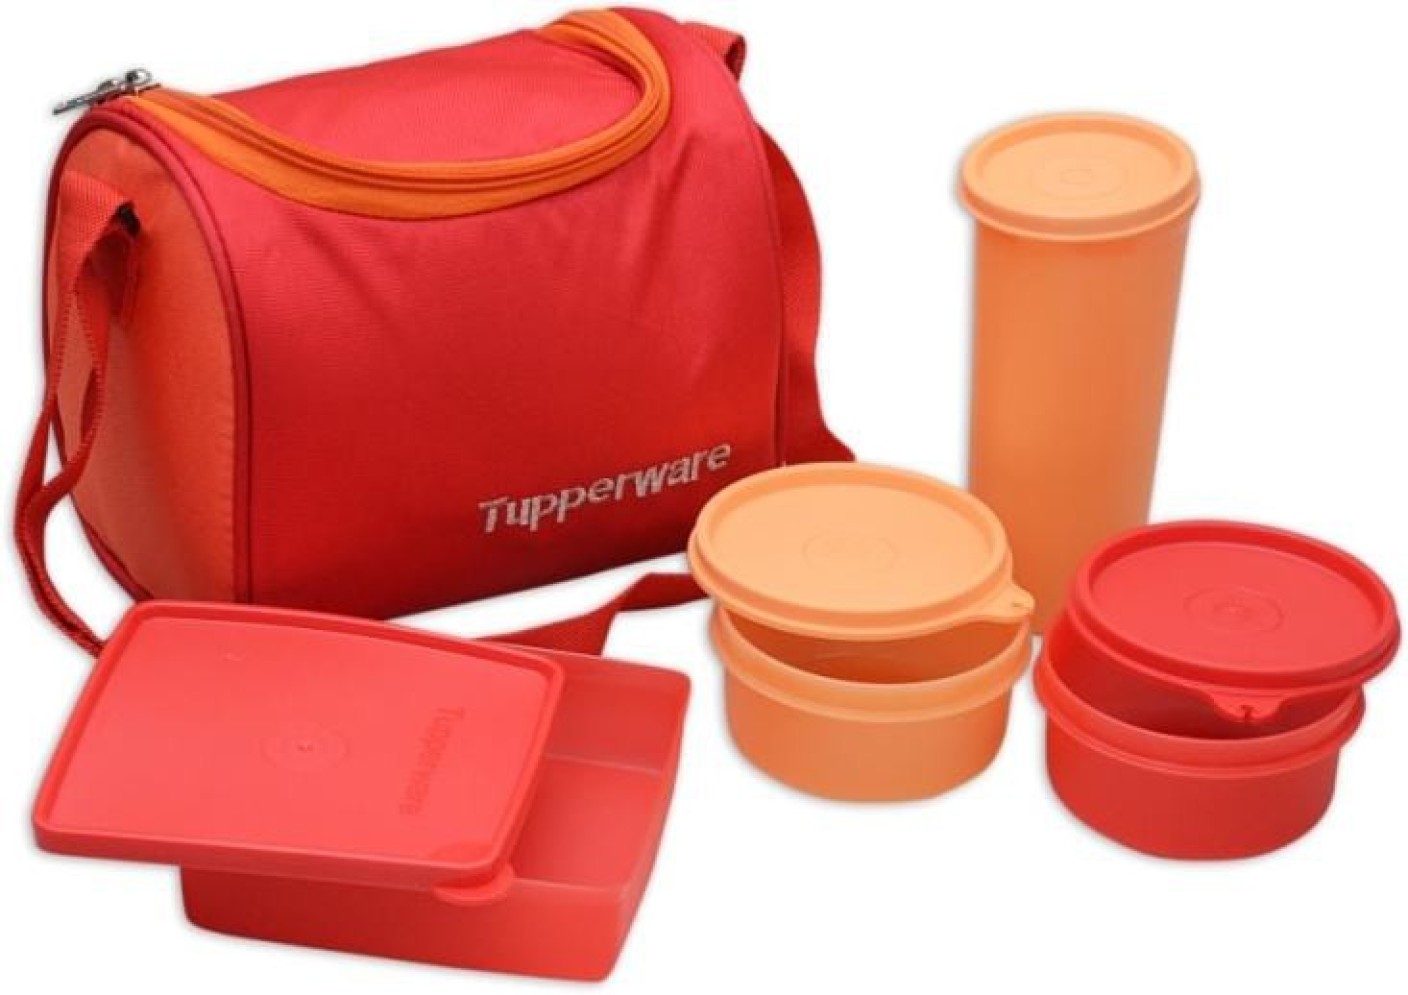 Tupperware Containers Microwave SafeBestMicrowave